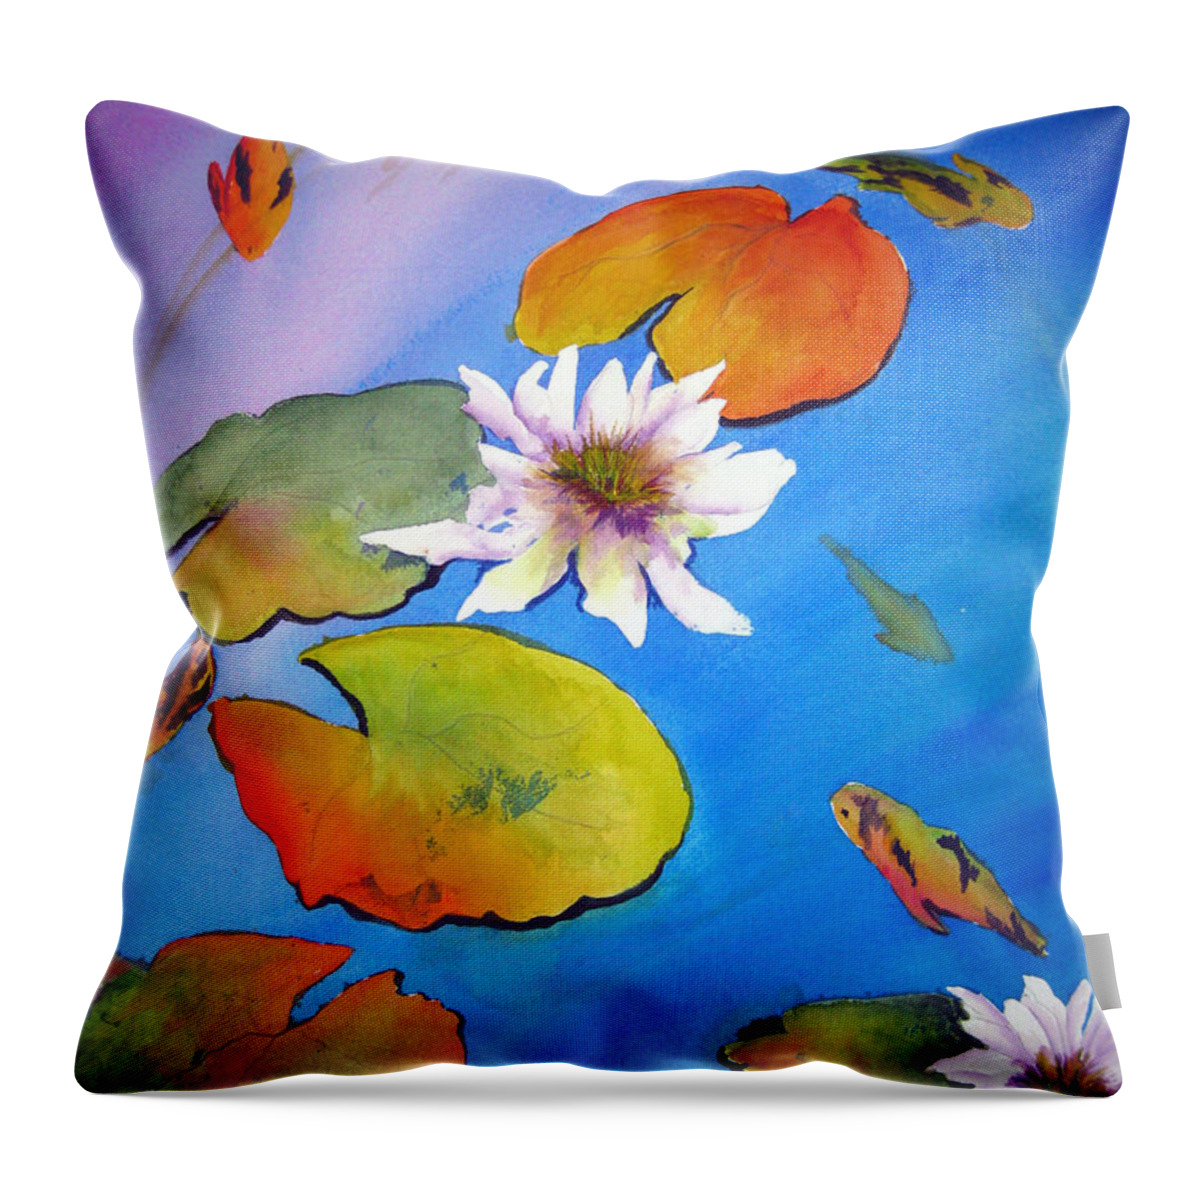 Lil Taylor Throw Pillow featuring the painting Fish Pond I by Lil Taylor